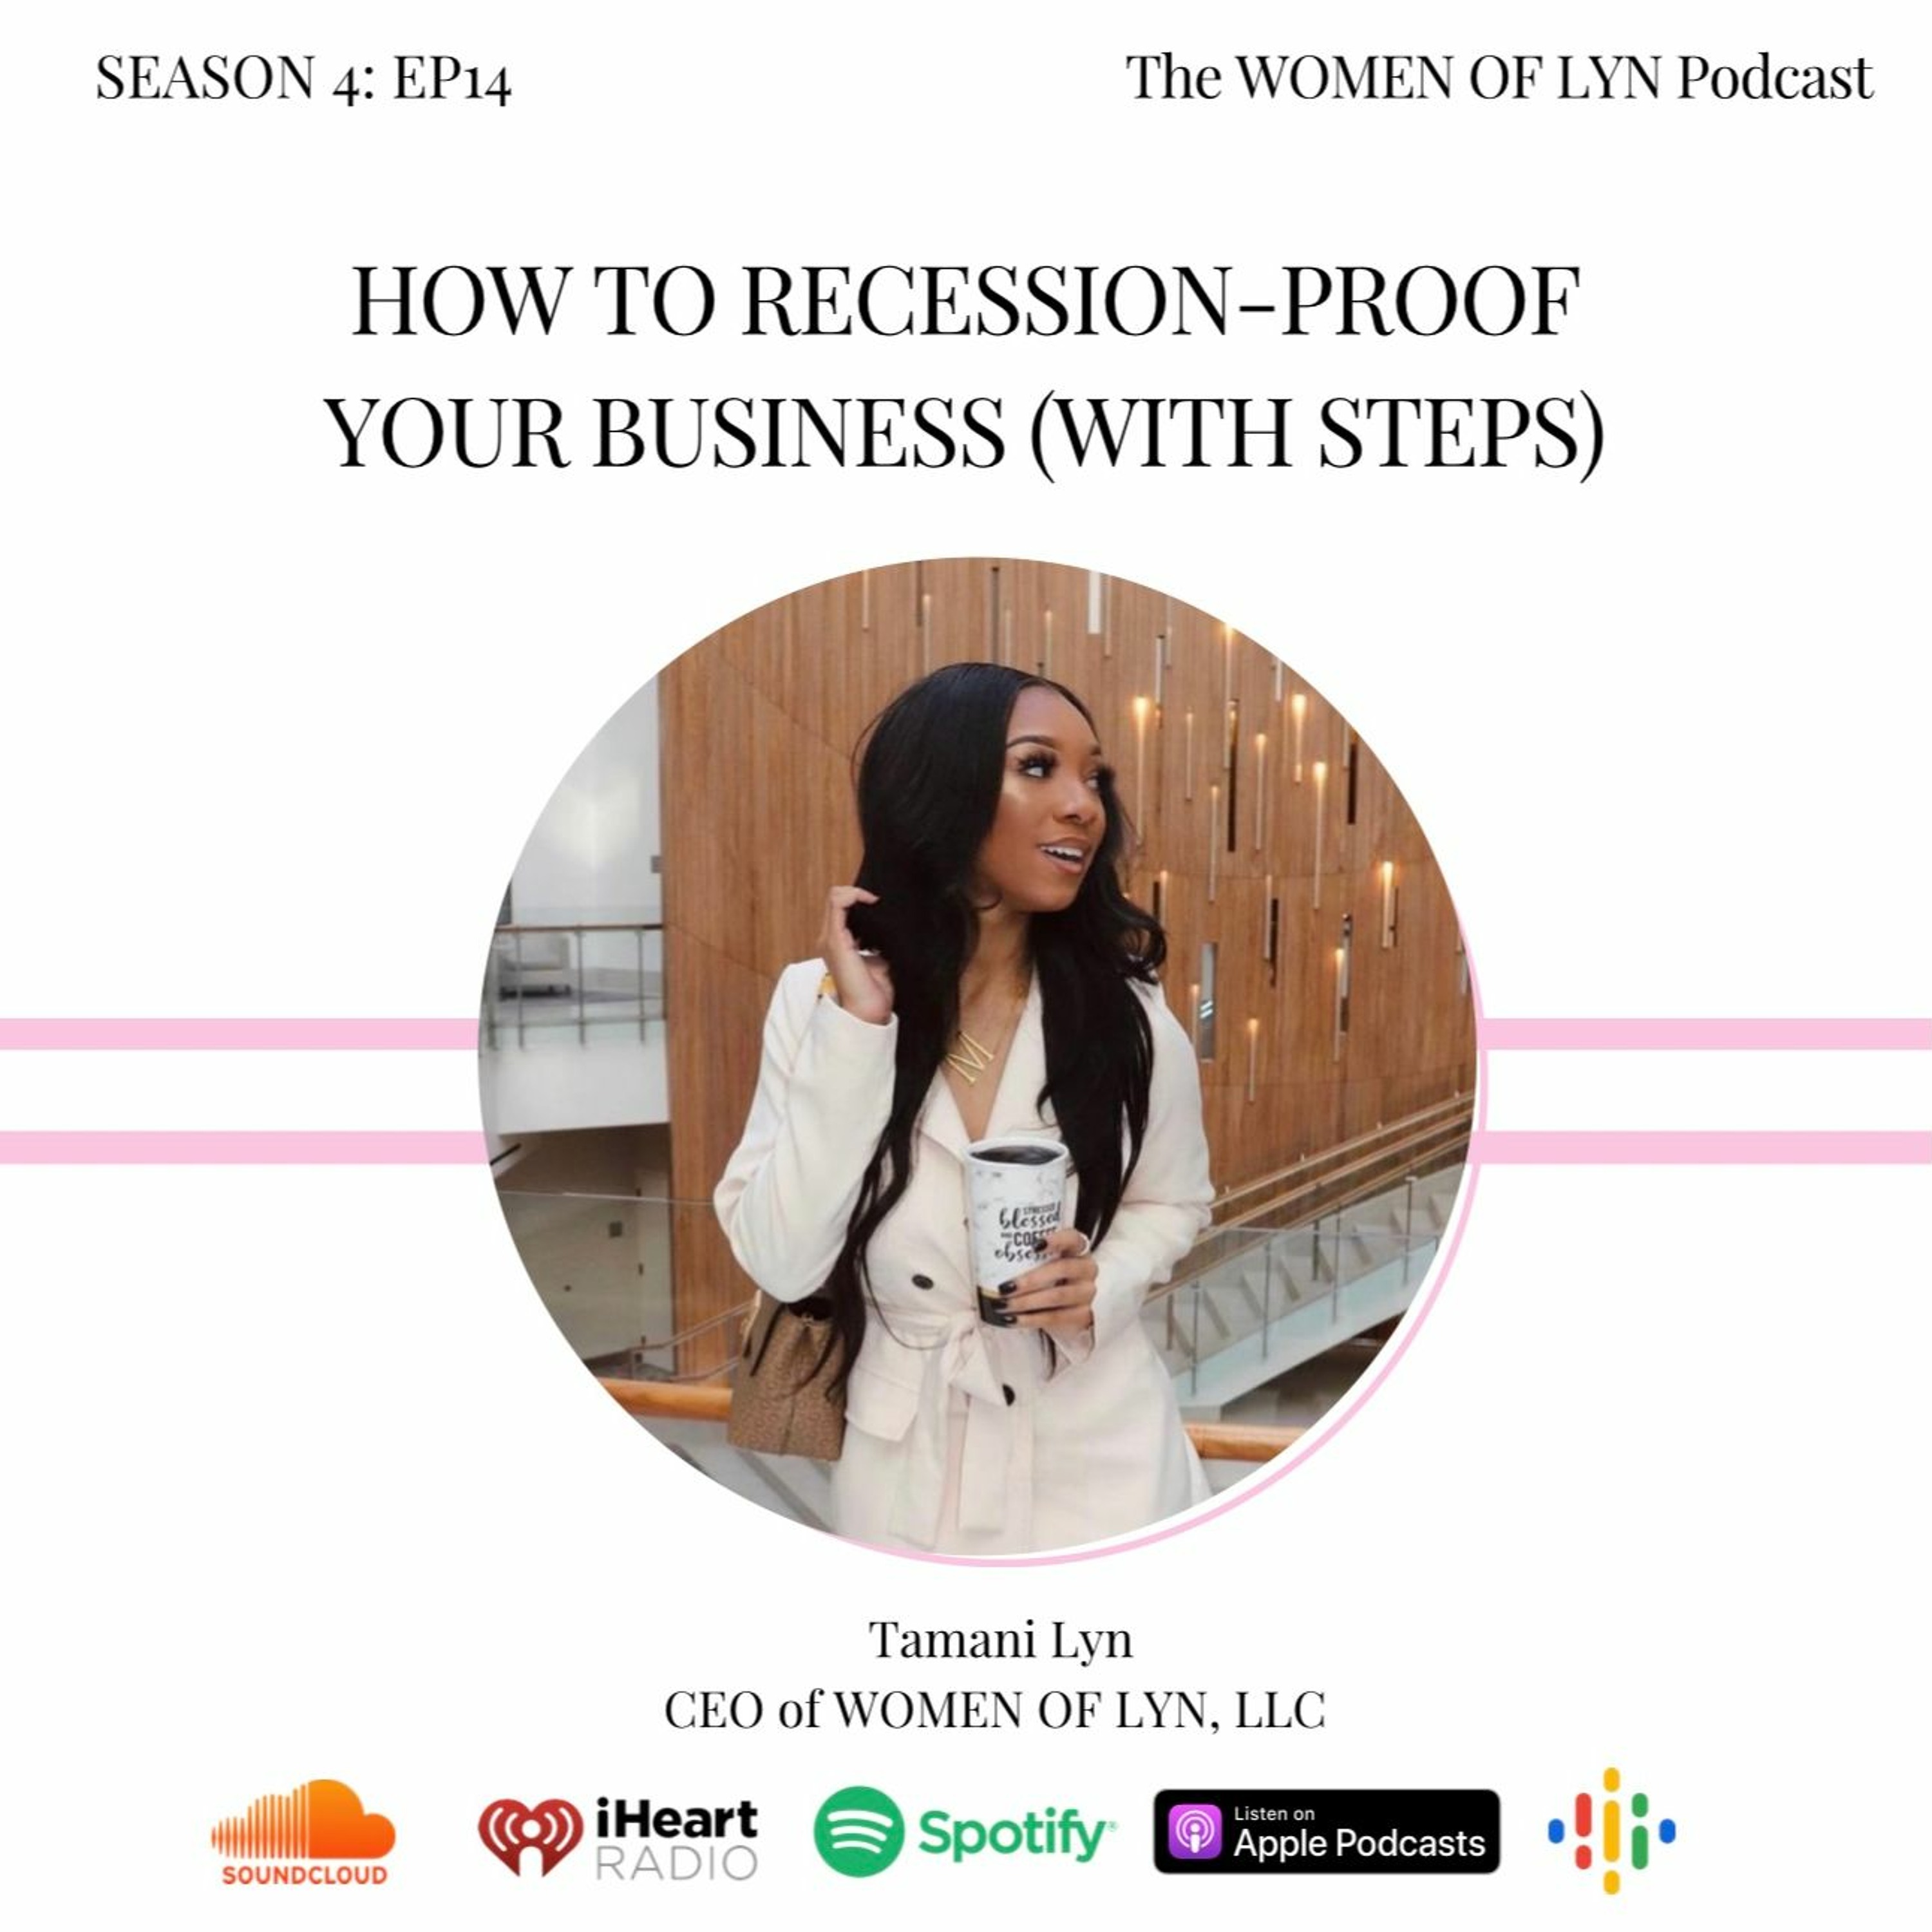 Episode 14: ”How To Recession Proof Your Business” (With Steps)